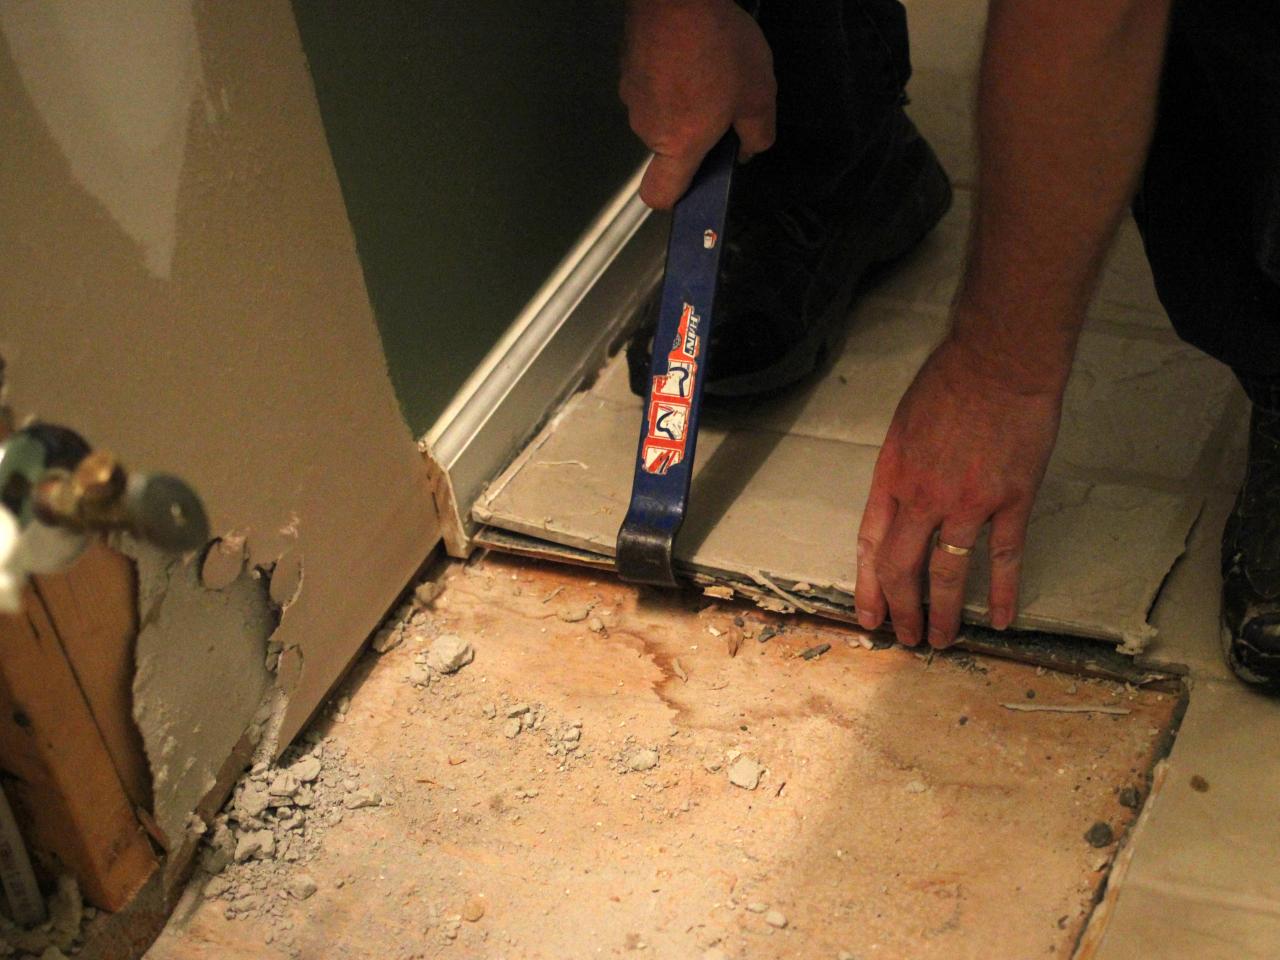 How To Remove A Tile Floor Tos Diy, How To Remove Tile From Bathroom Walls